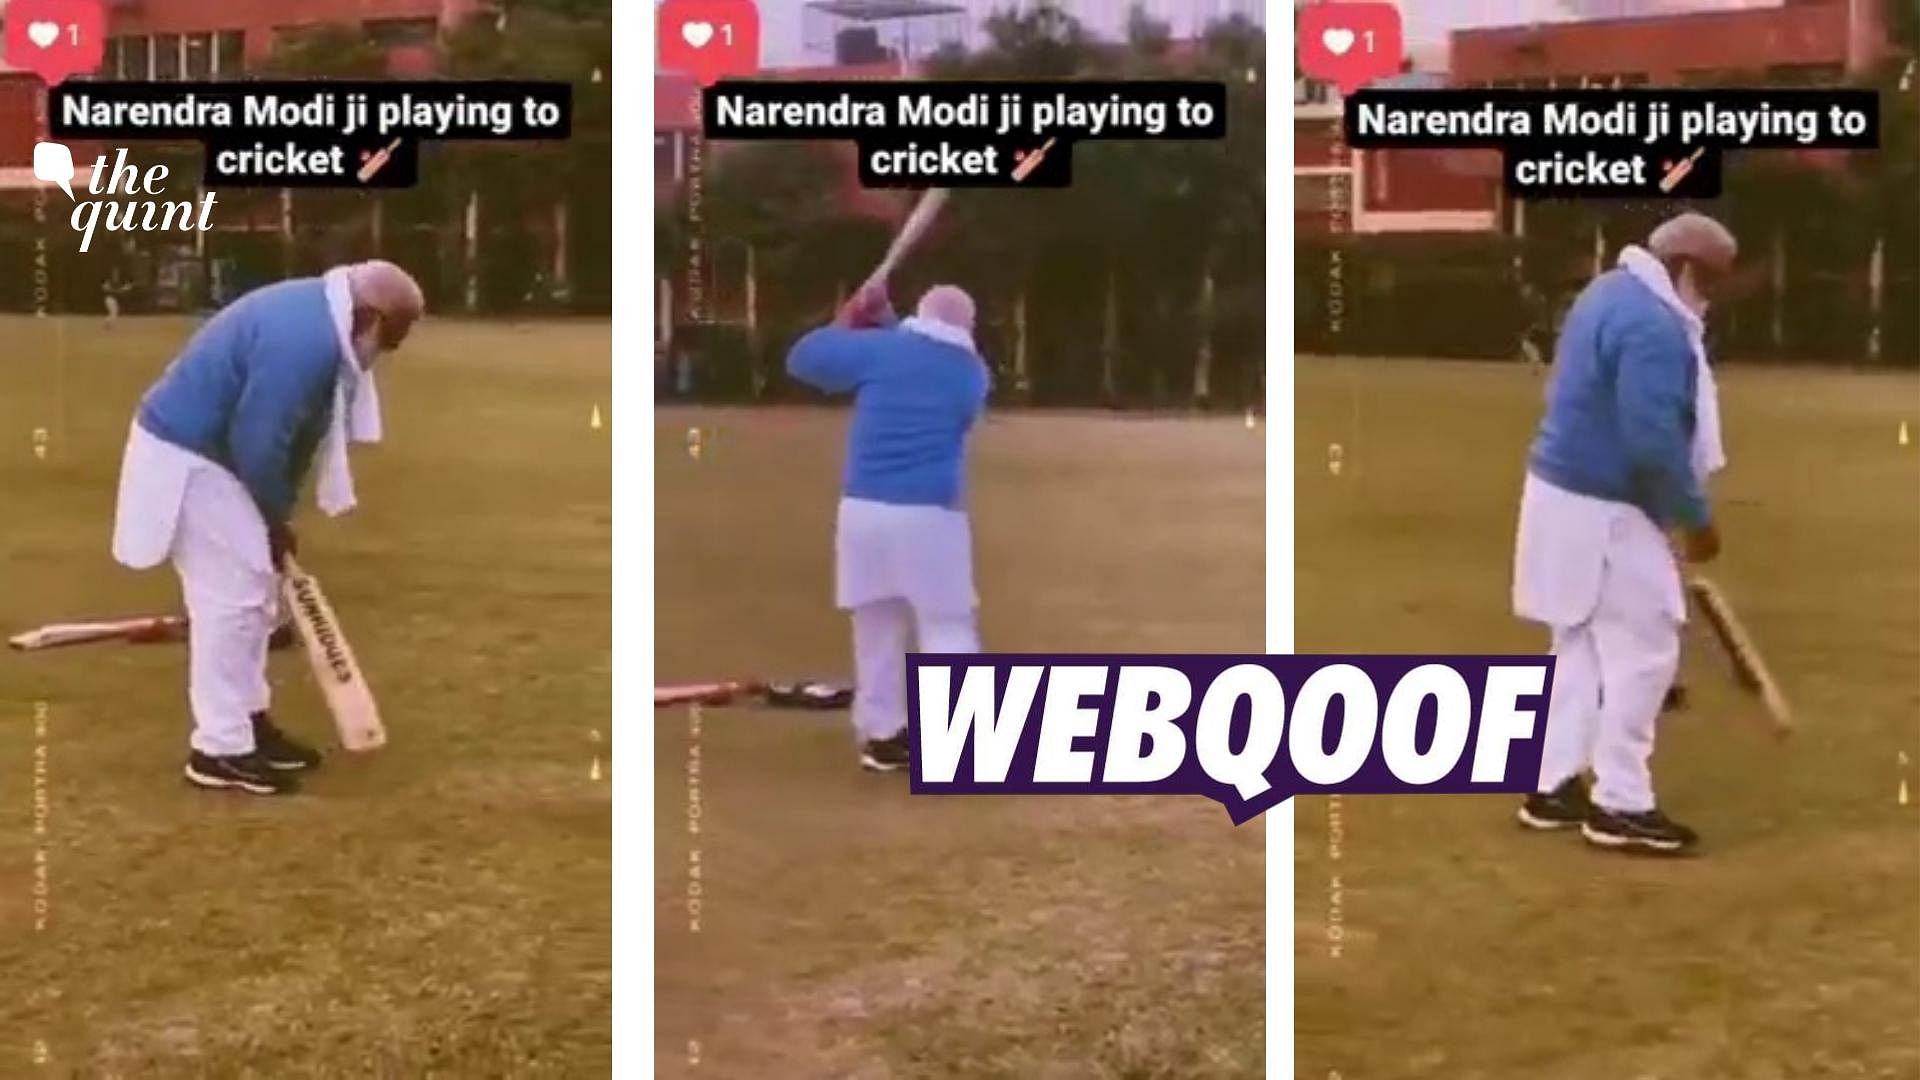 <div class="paragraphs"><p>The claim states that that it is Prime Minister Narendra Modi playing cricket.&nbsp;</p></div>